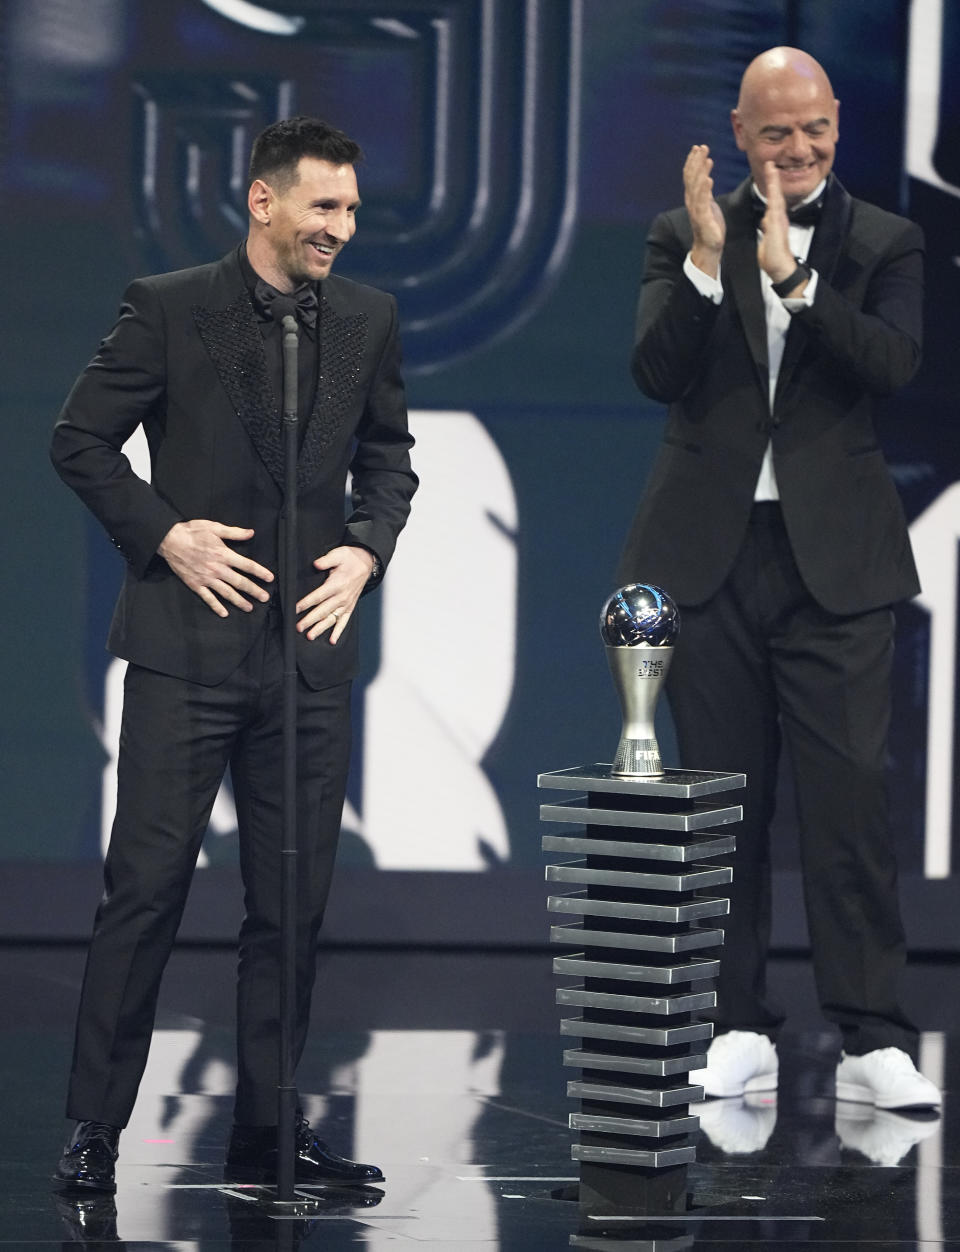 Argentina's Lionel Messi speaks after receiving the Best FIFA Men's player award during the ceremony of the Best FIFA Football Awards in Paris, France, Monday, Feb. 27, 2023. (AP Photo/Michel Euler)